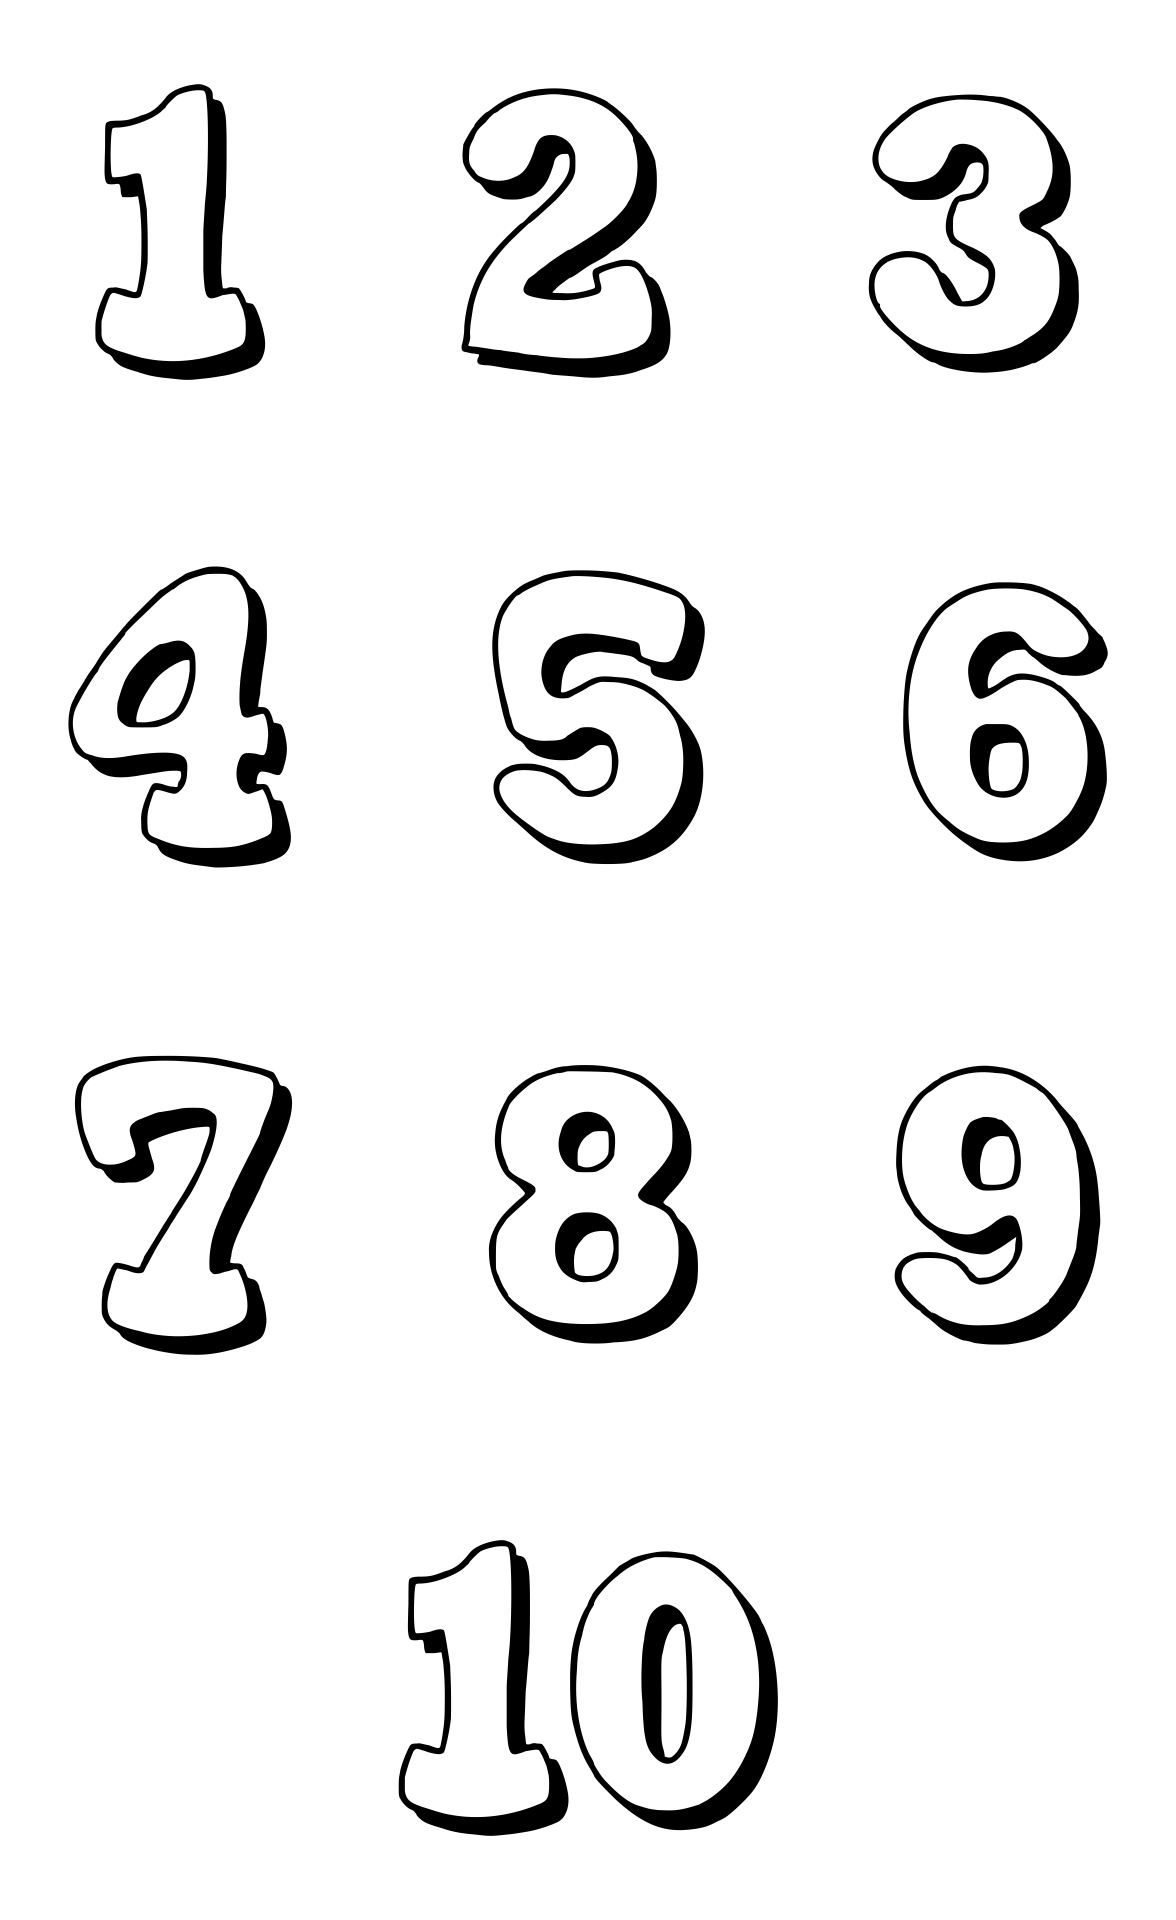 10-best-printable-bubble-numbers-1-10-pdf-for-free-at-printablee